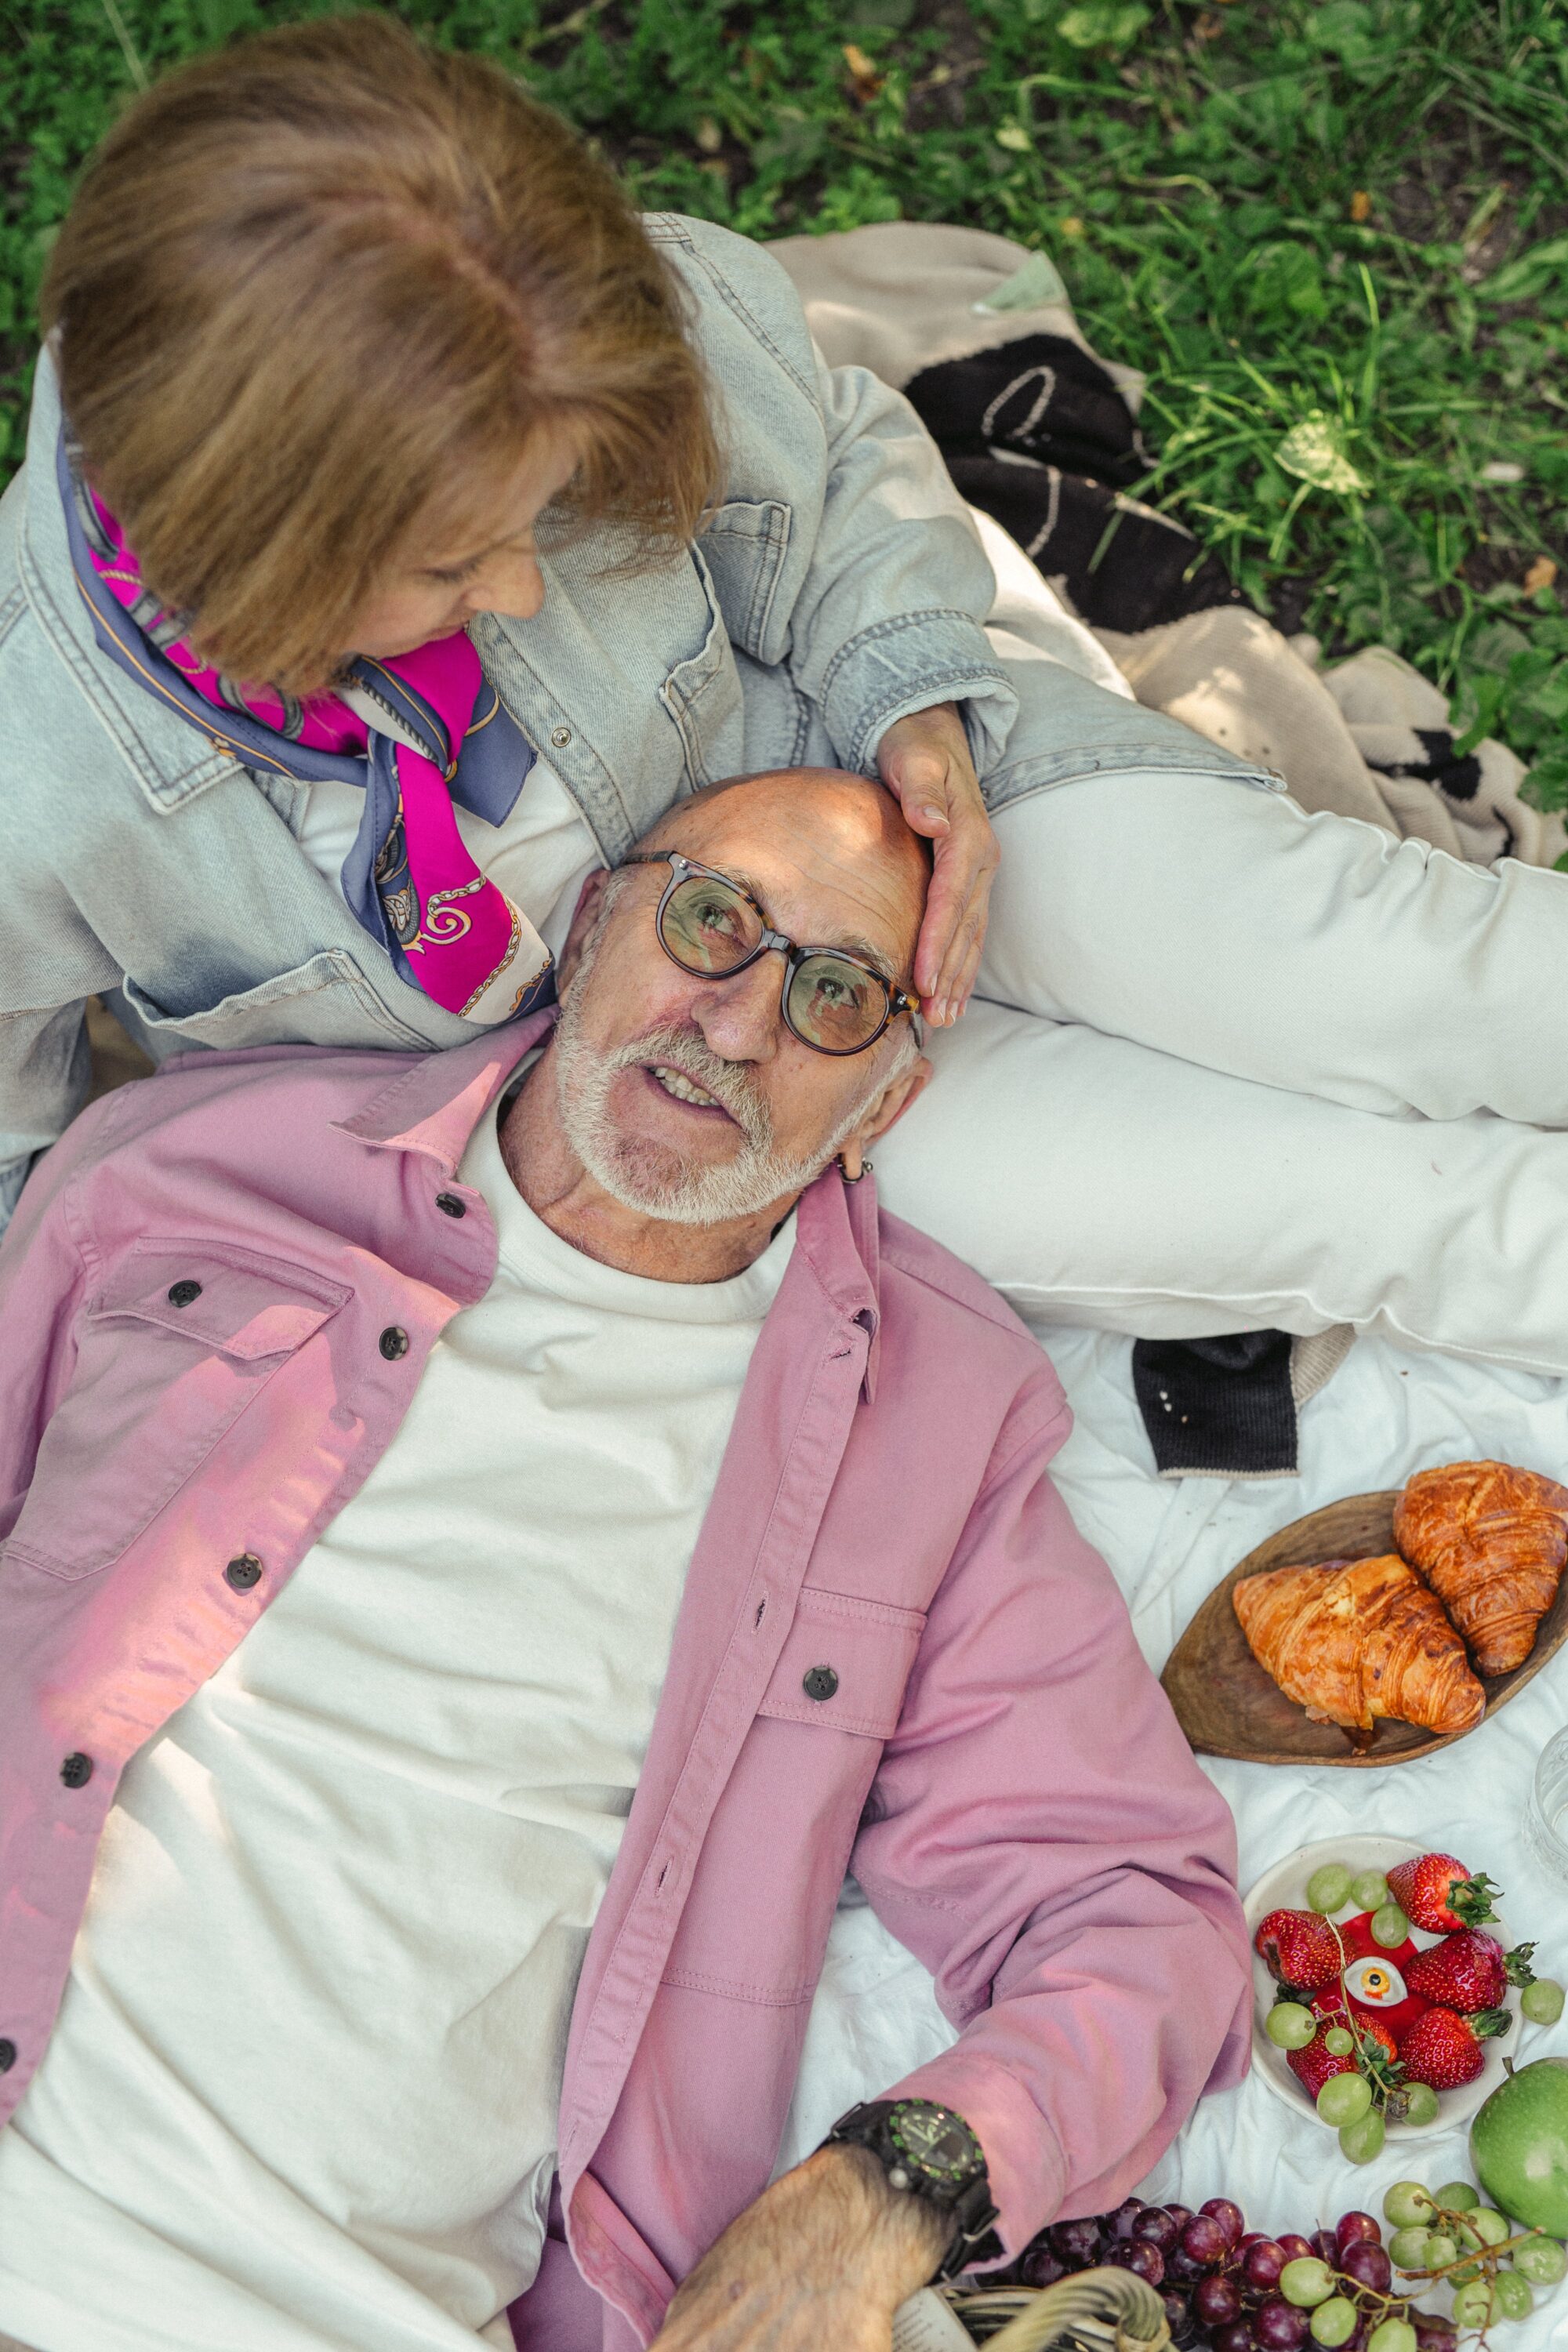 importance of sleep for retirees - Embracing a Sleep-Friendly Lifestyle in Retirement